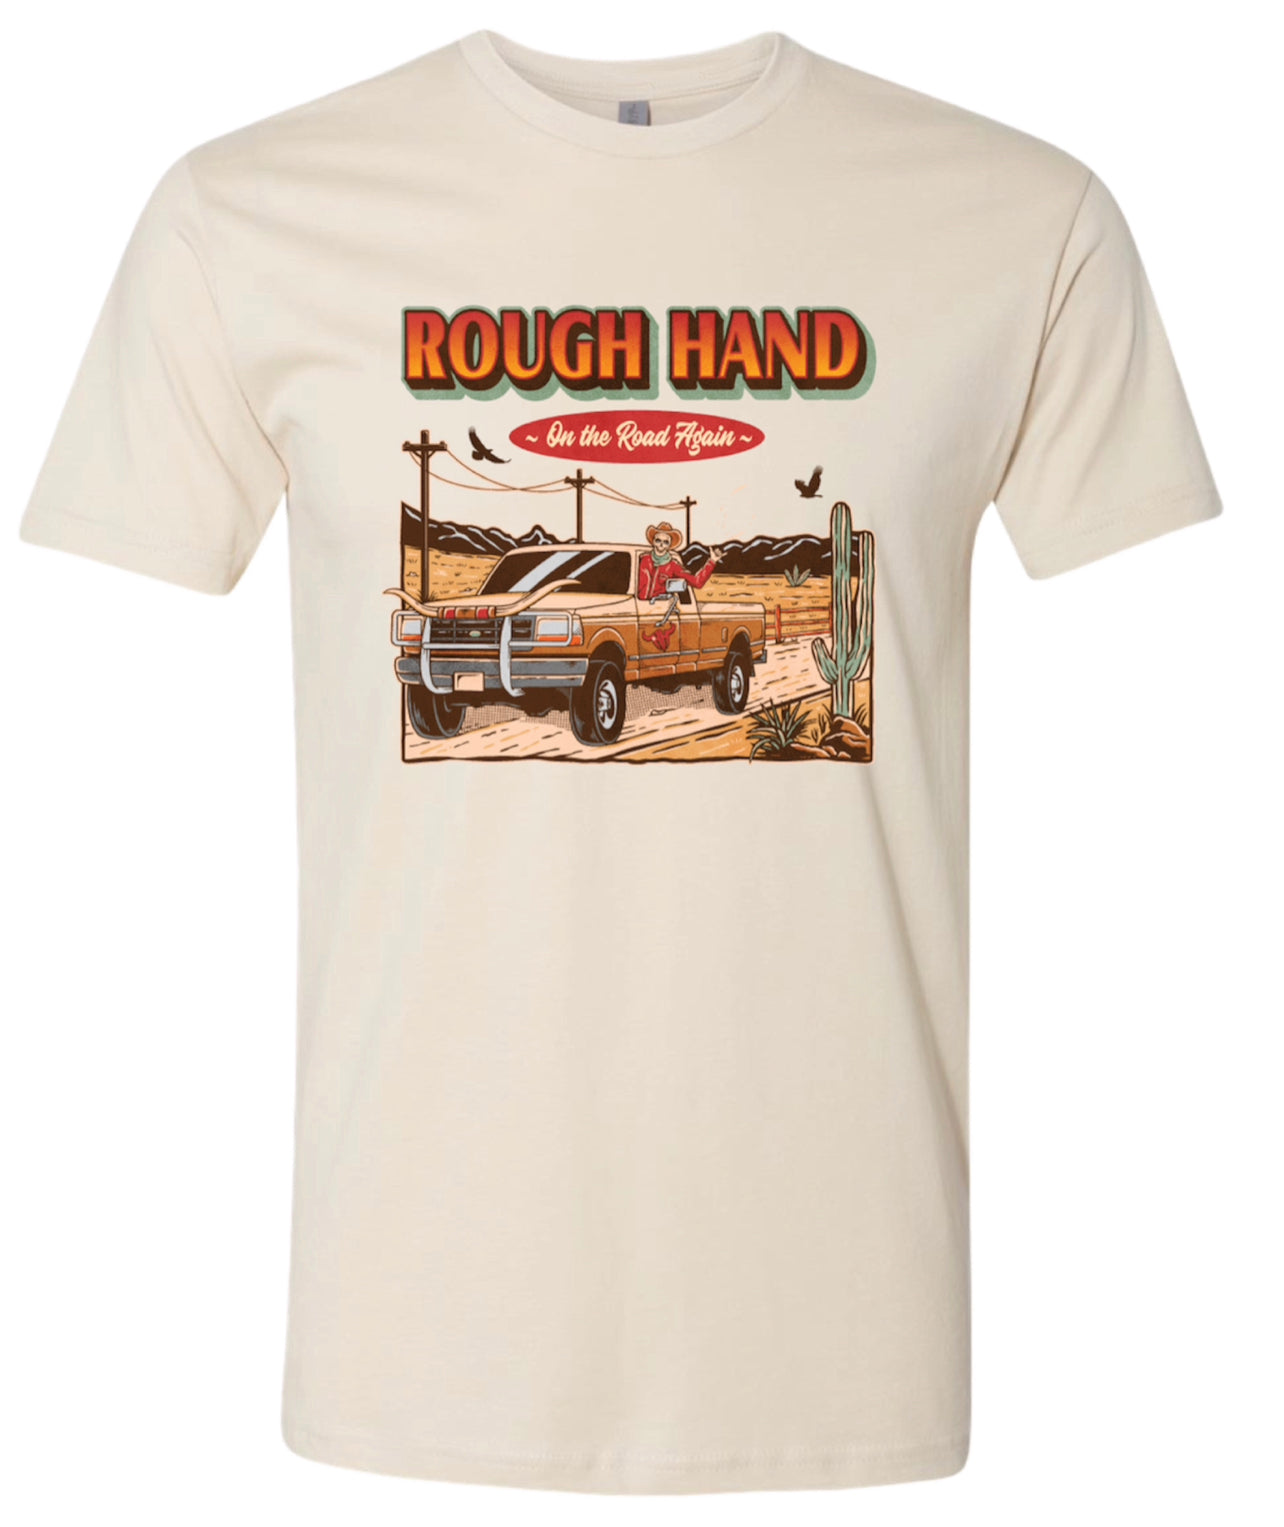 On the road T - RoughHand